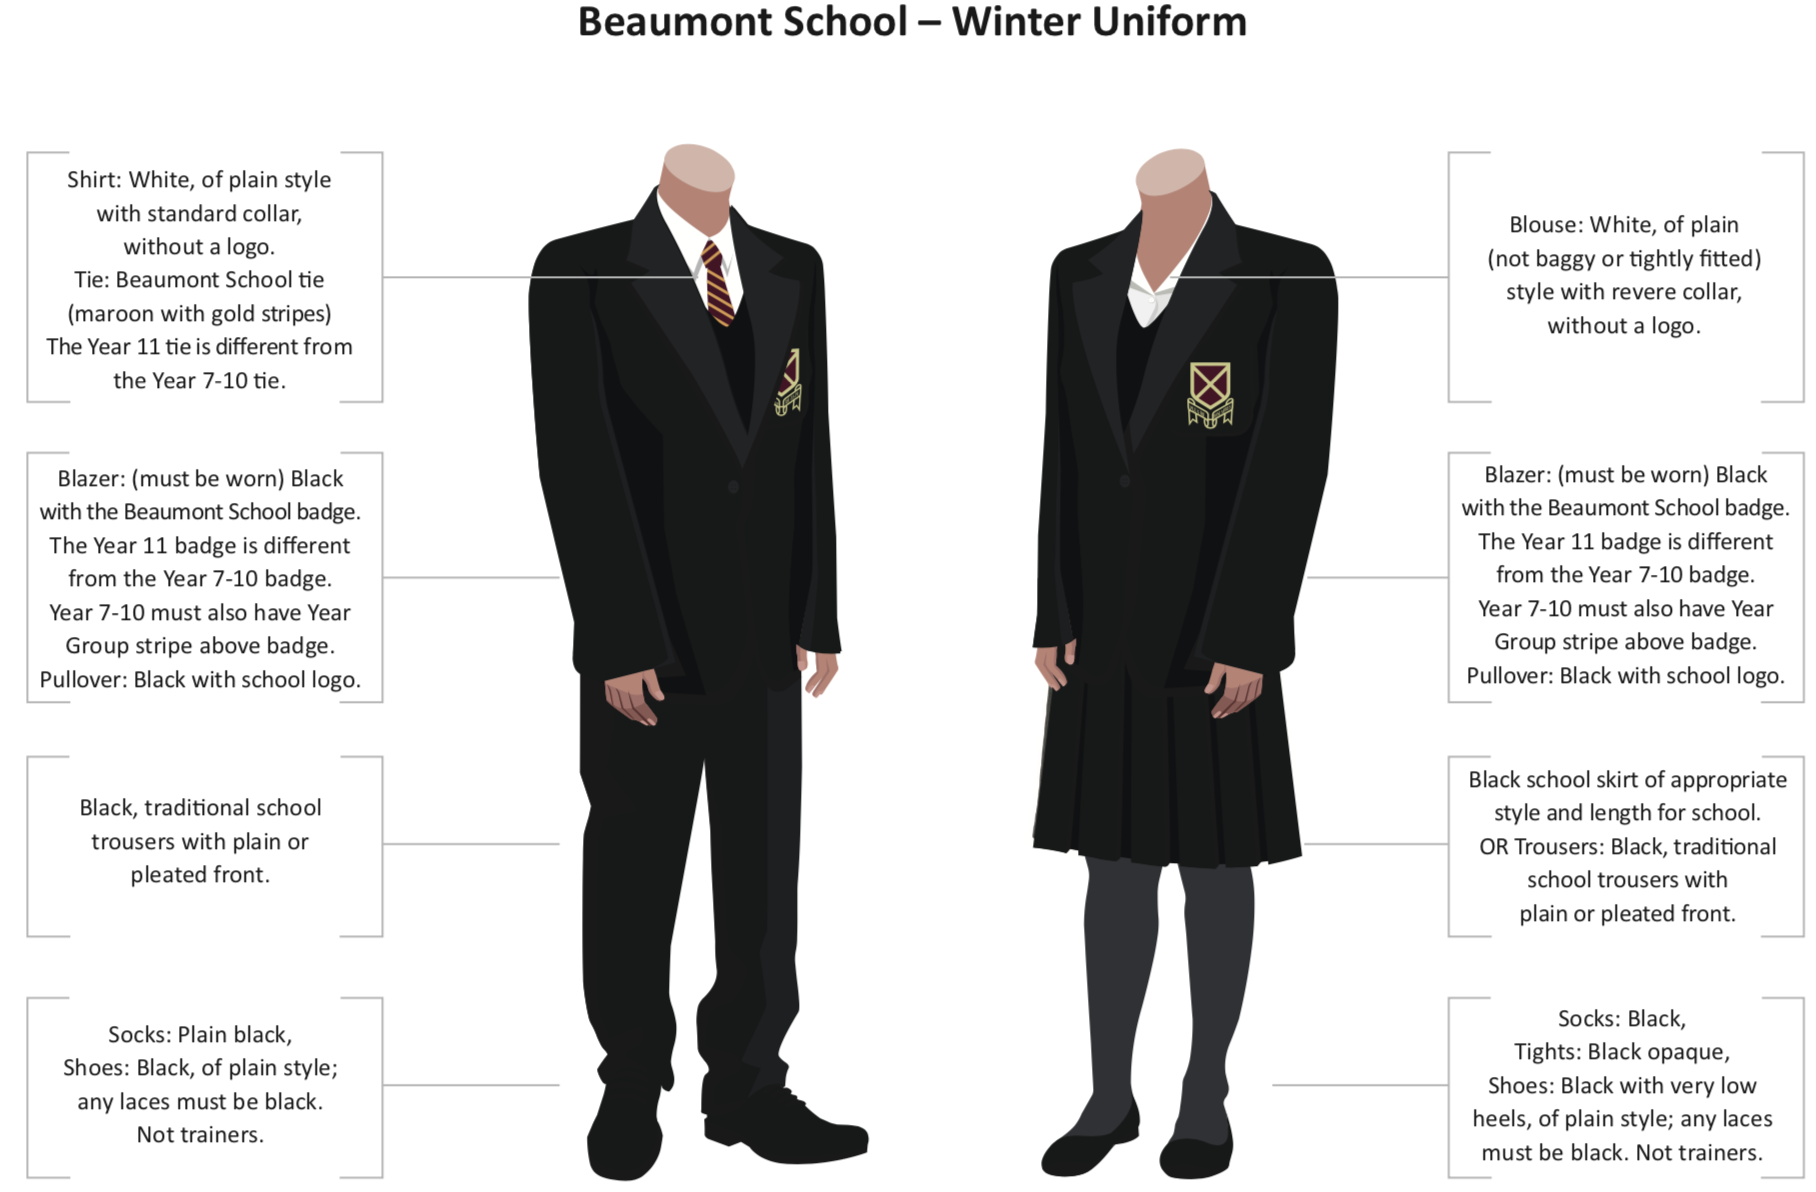 all students should wear uniforms